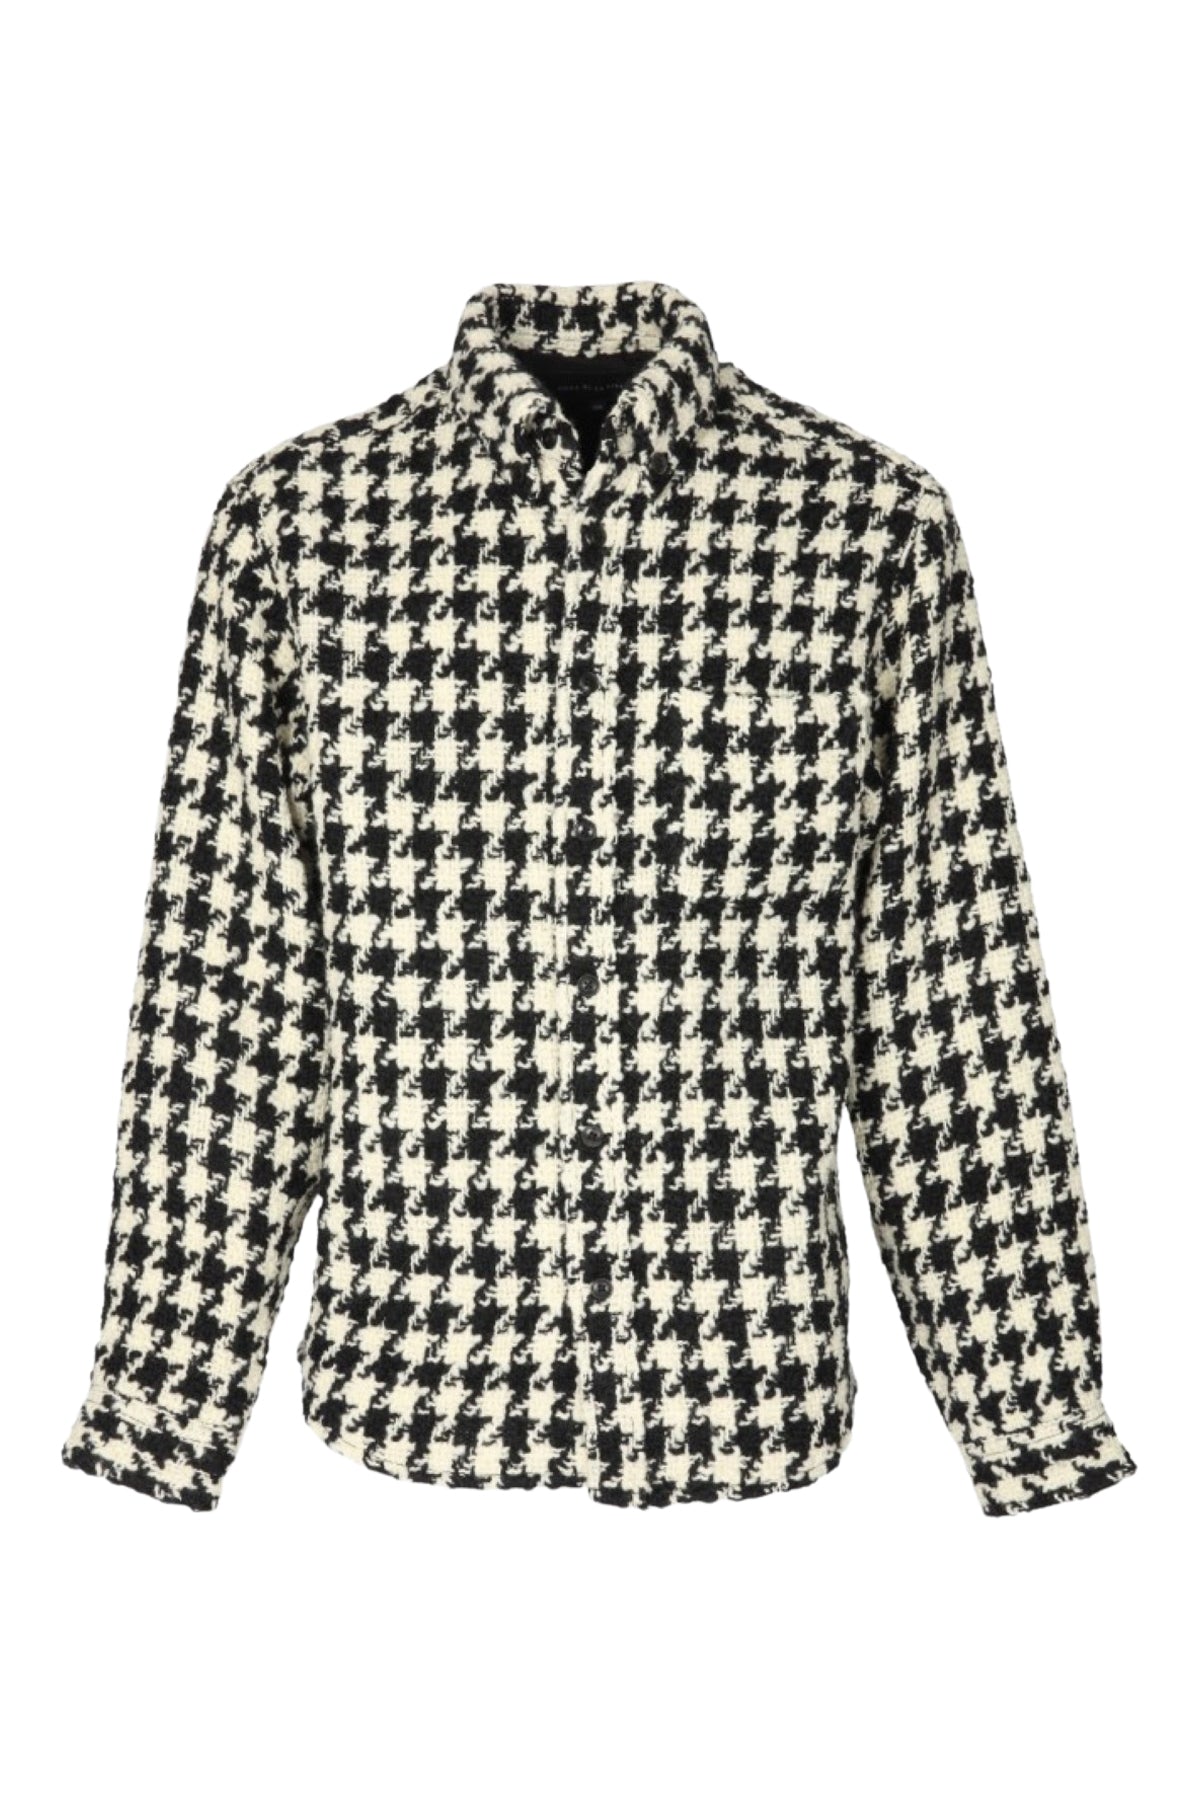 Tommy/Wool Tweed Oversized Shirt